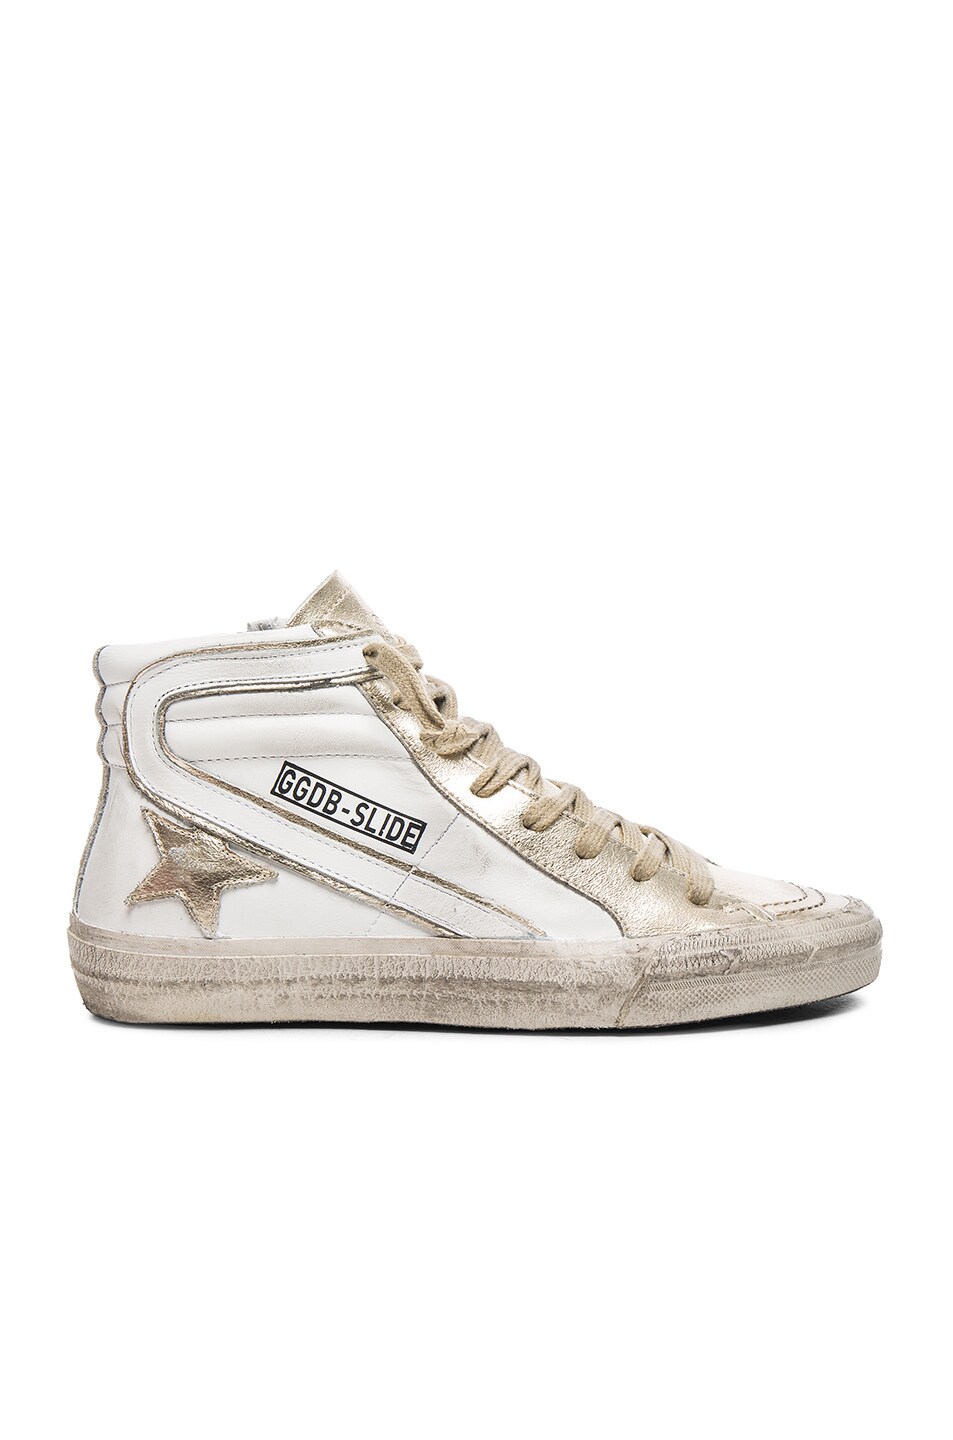 Image 1 of Golden Goose Leather Slide Sneakers in White & Gold